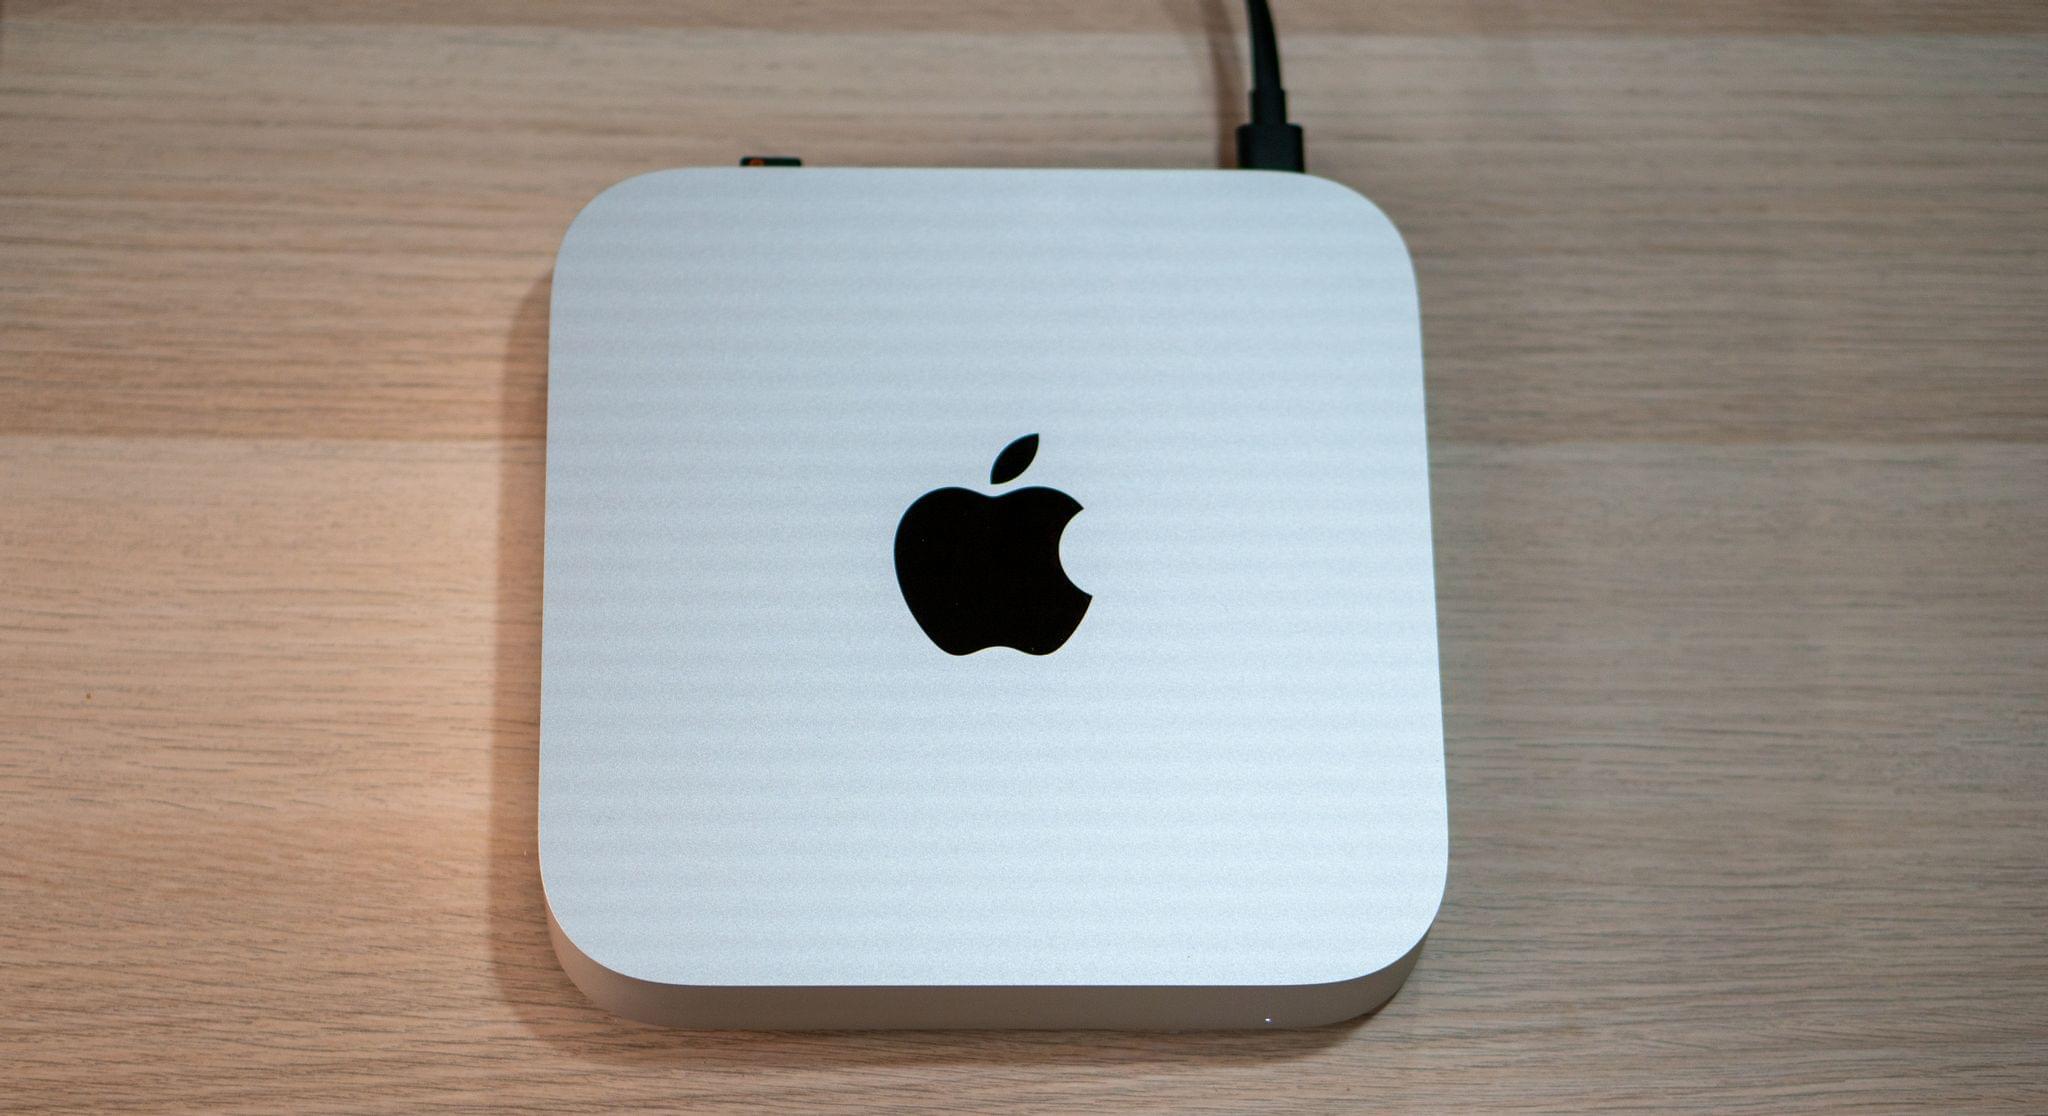 Apple's M1 Mac mini can be made portable or smaller with some tinkering -  Current Mac Hardware Discussions on AppleInsider Forums